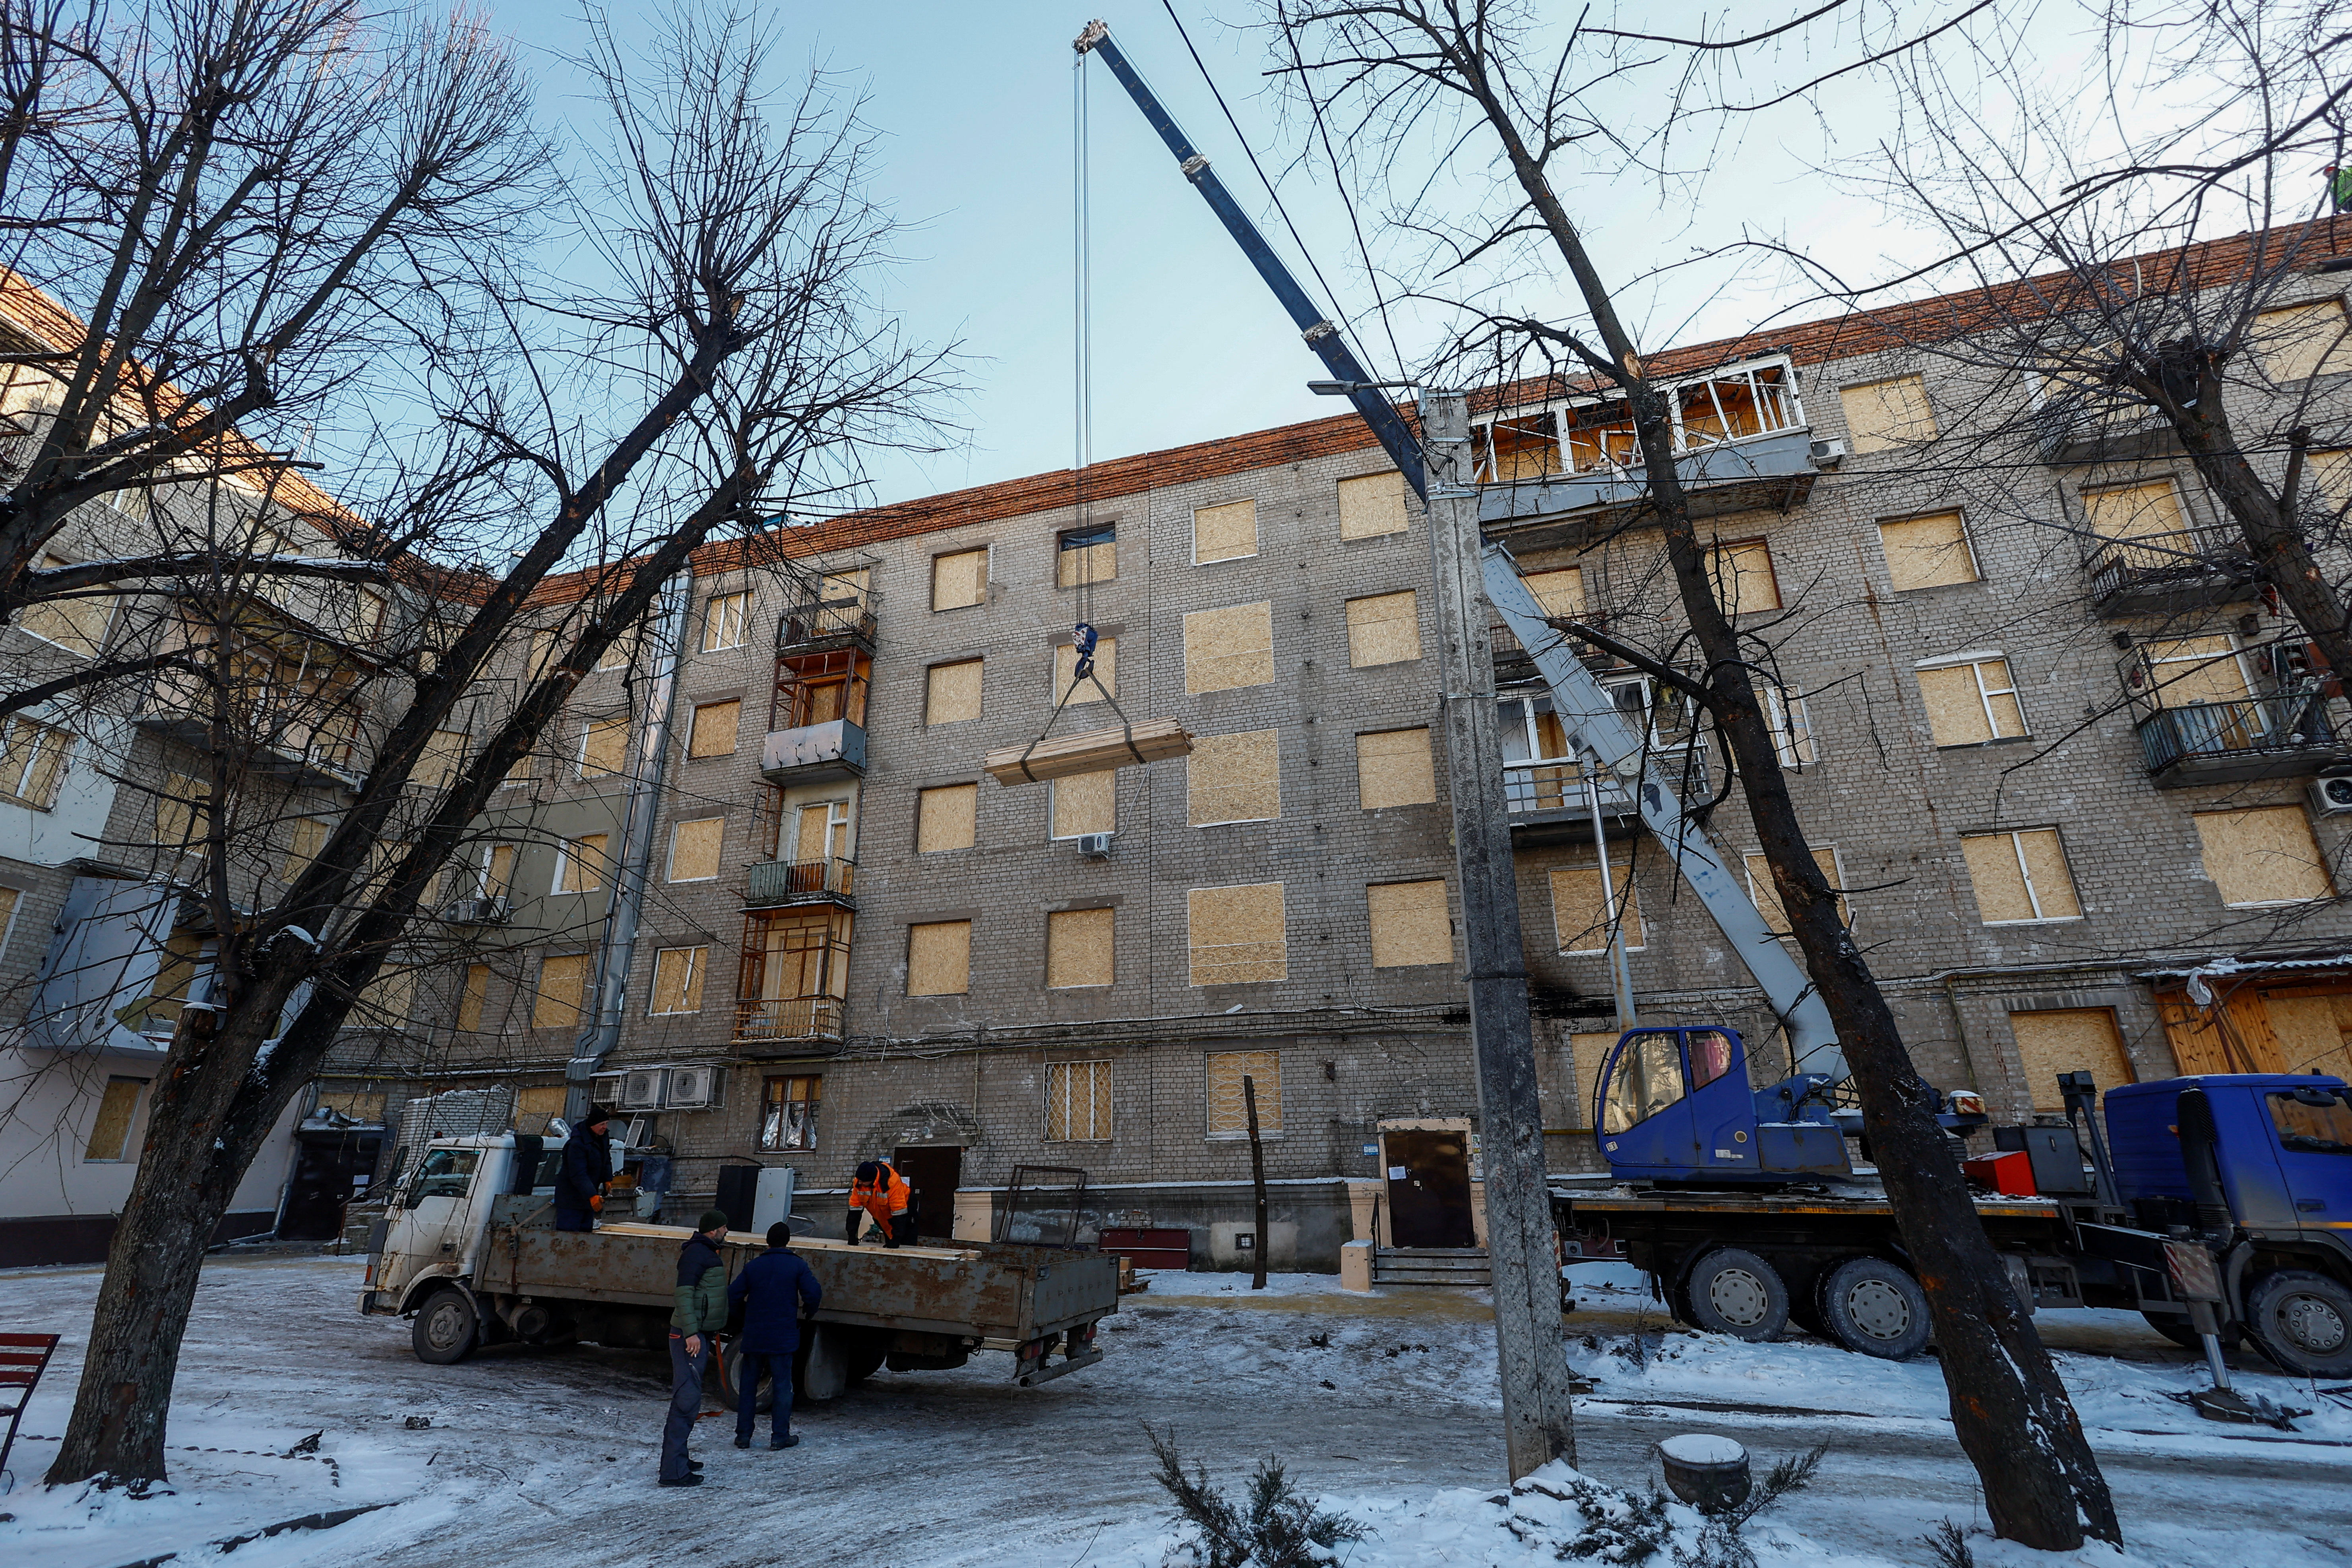 Workers repair an apartment building damaged during one of the Russian missile strikes in Kharkiv